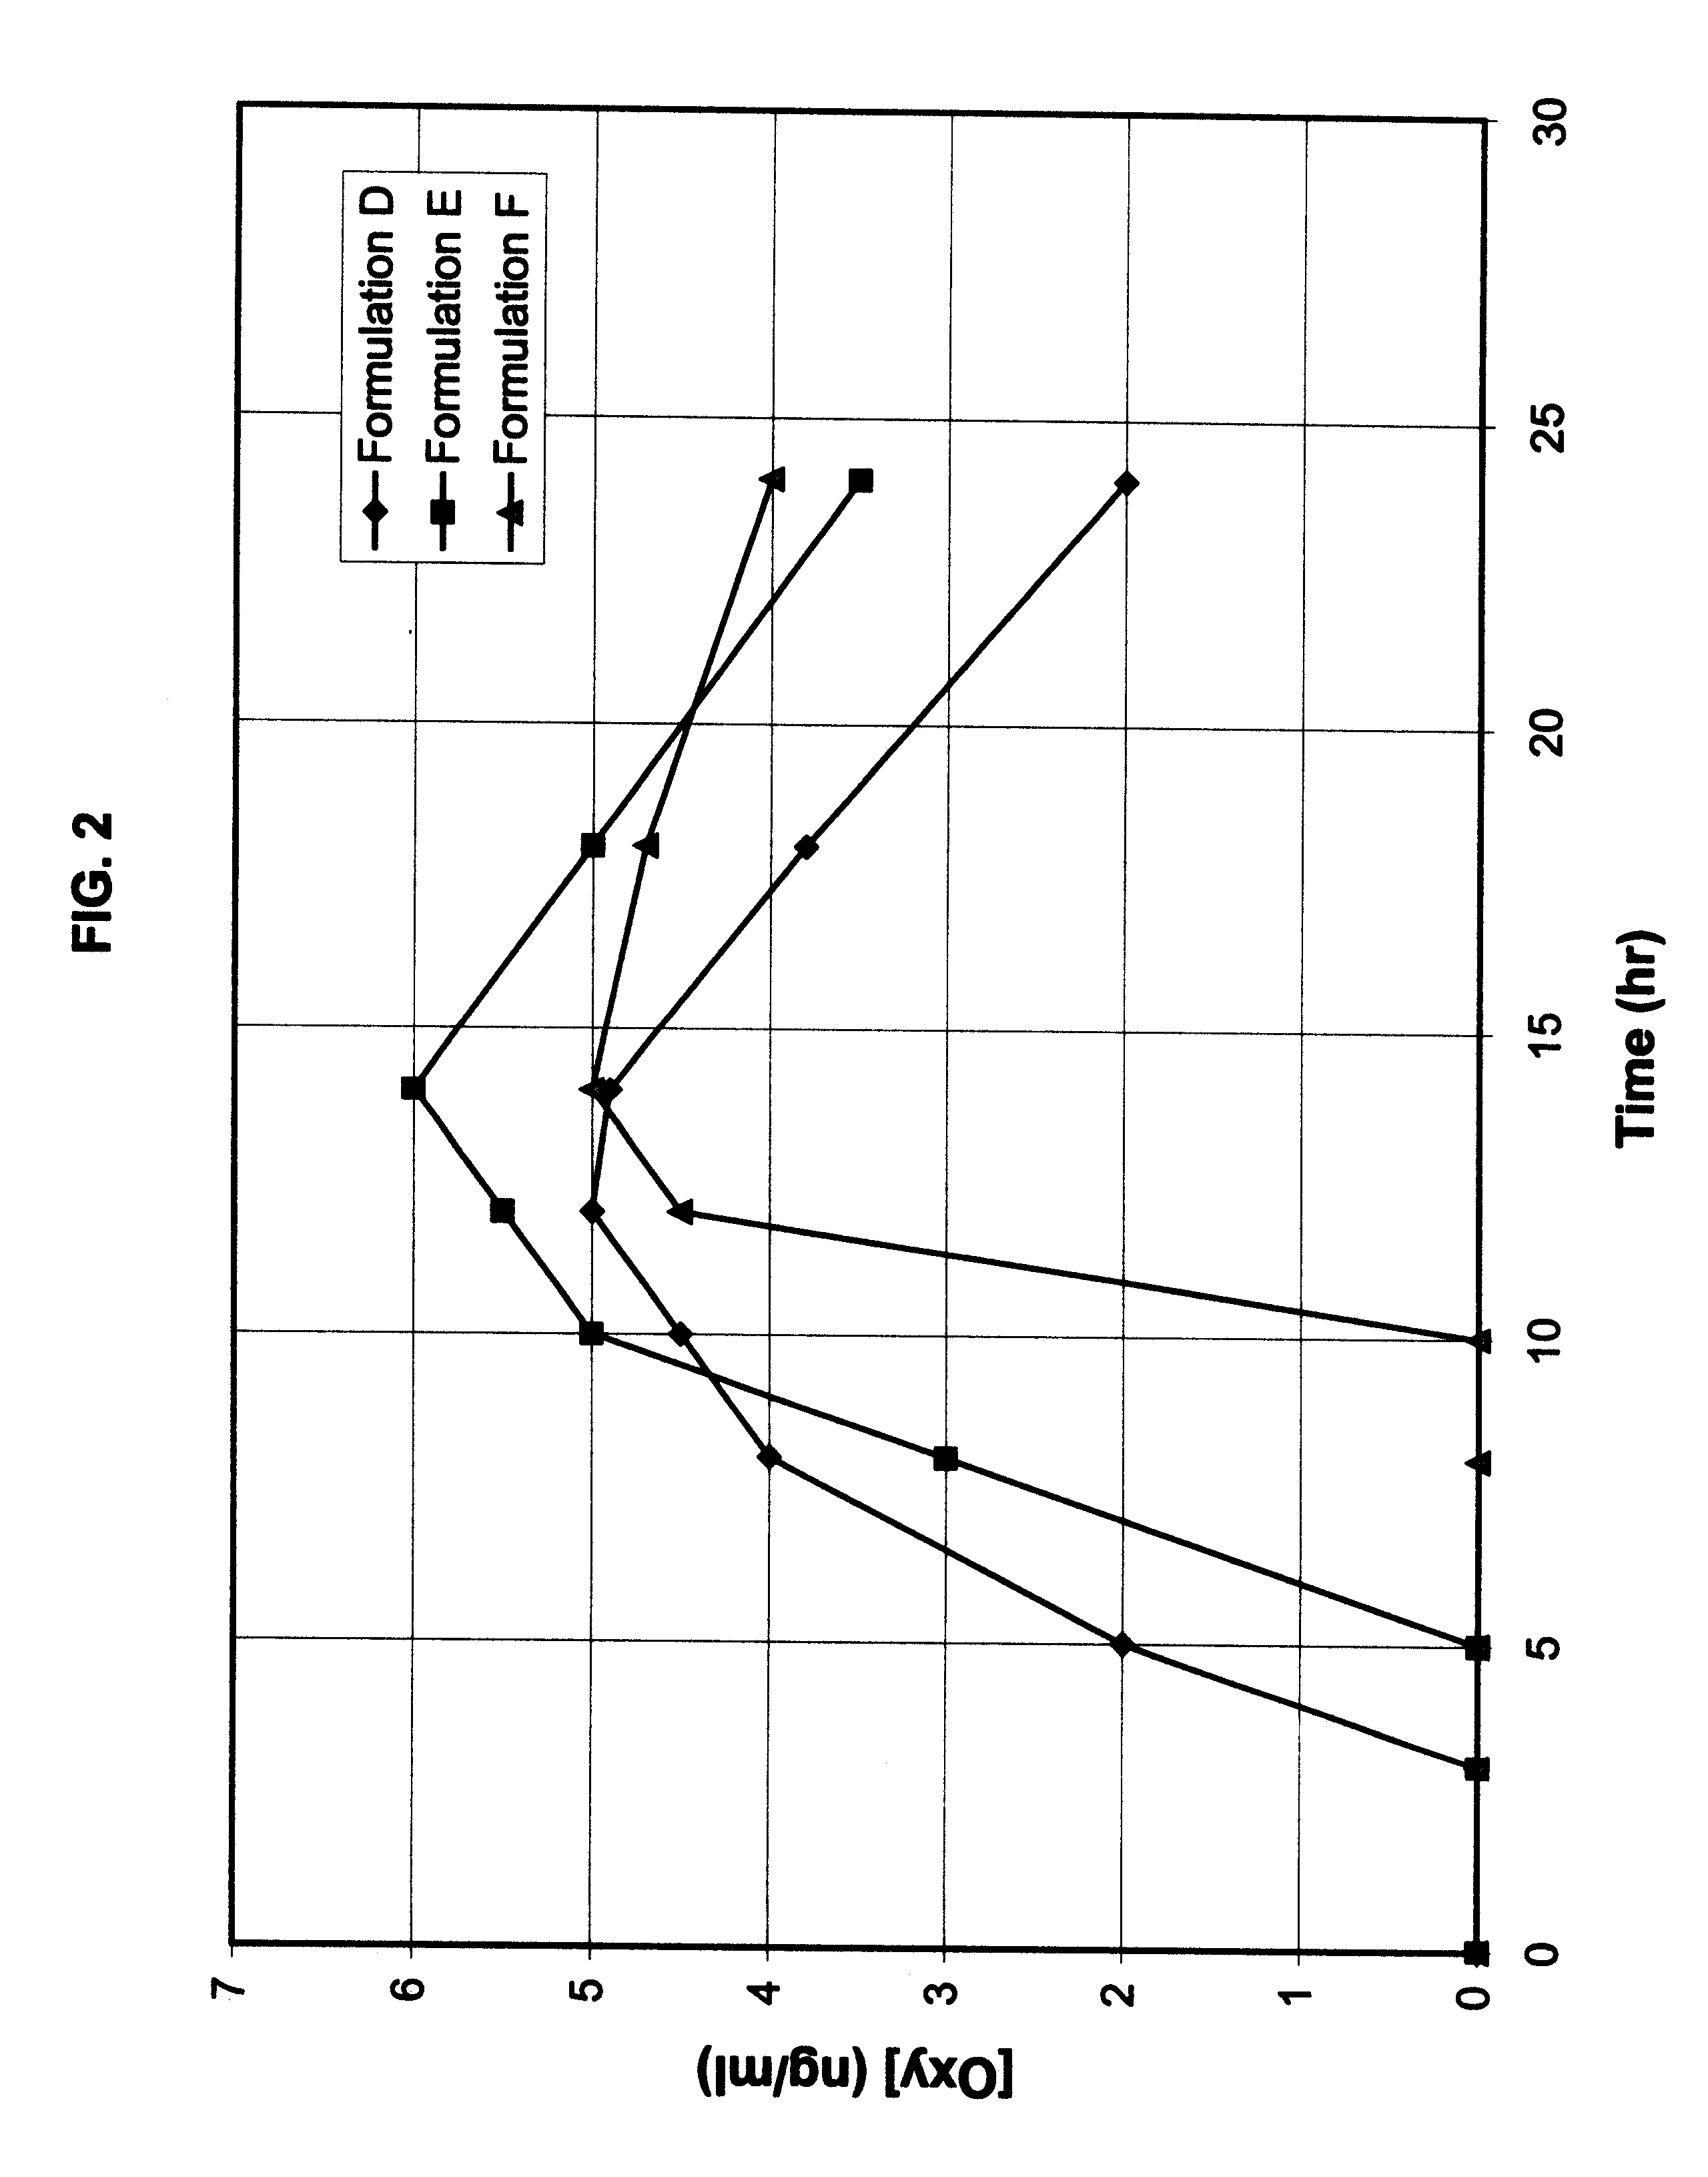 Multi-tablet oxybutynin system for treating incontinence